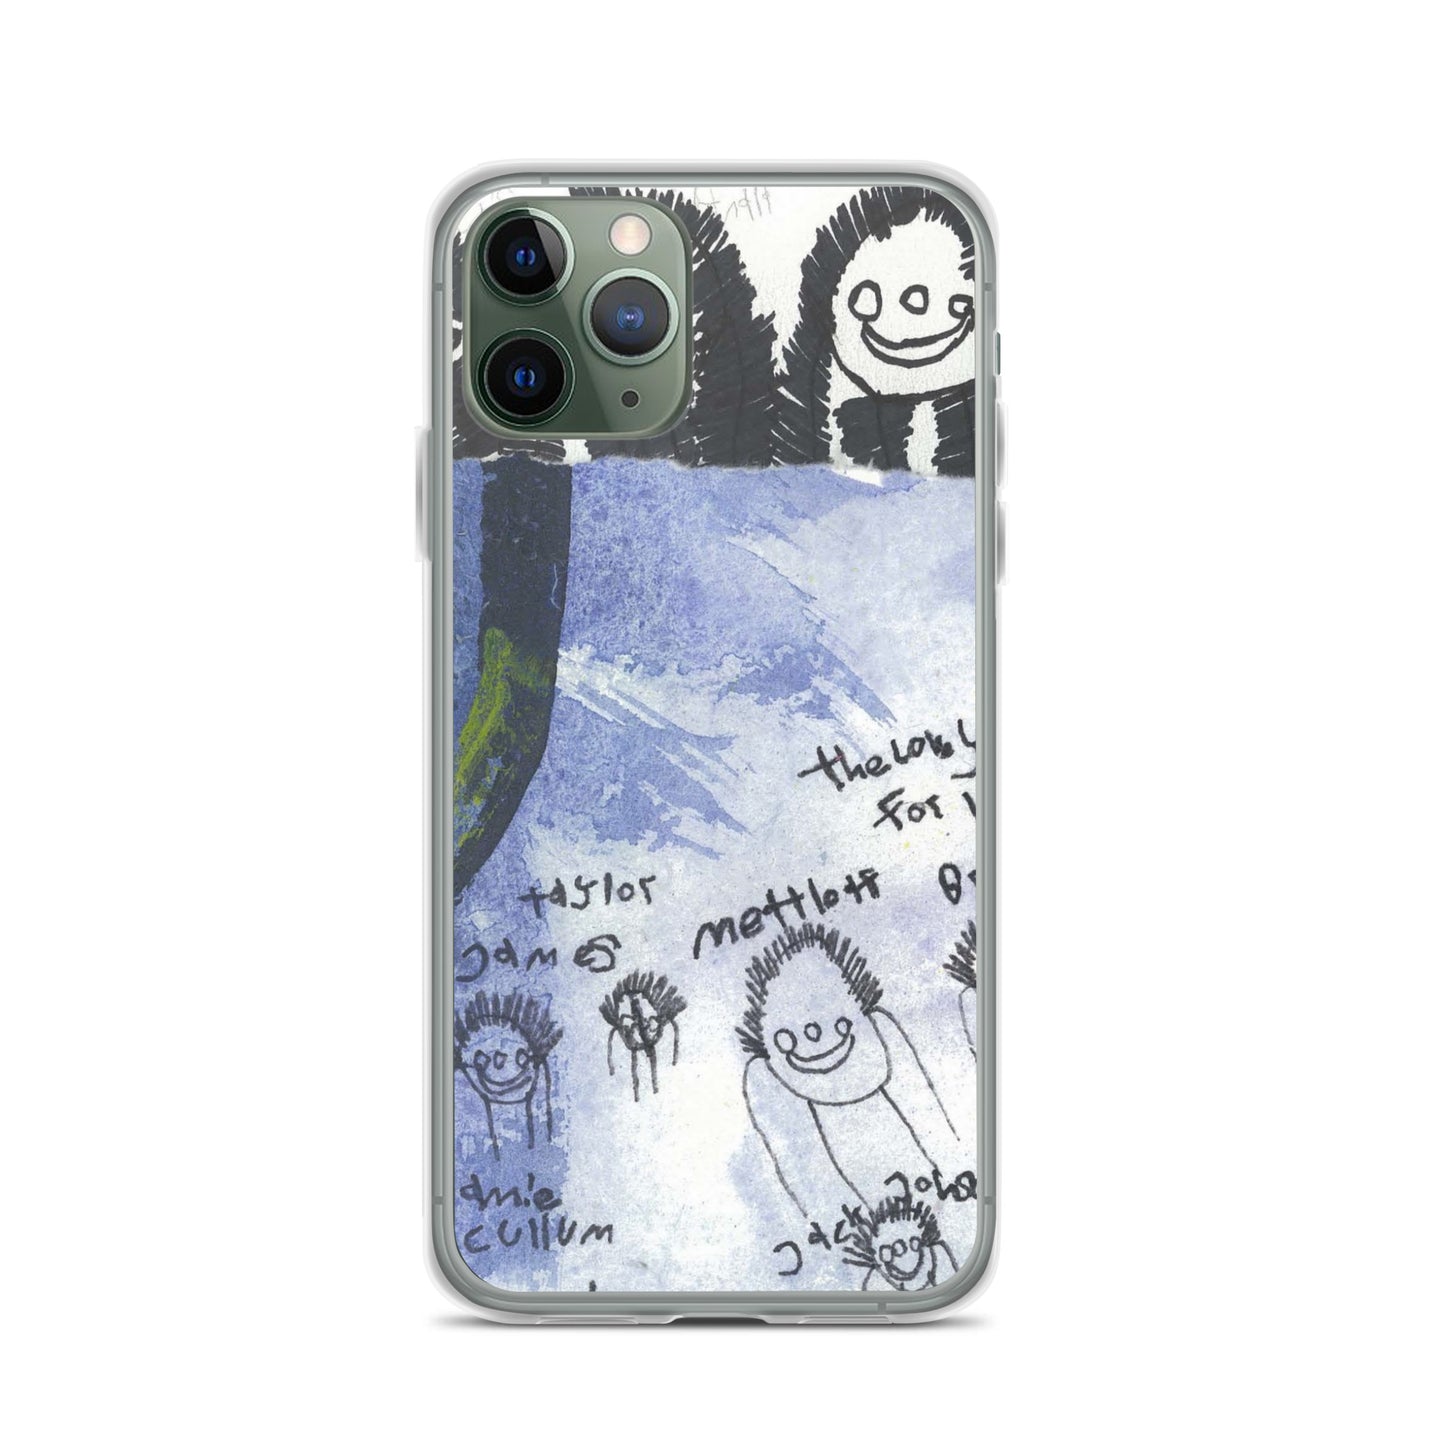 iPhone Case - Songwriters